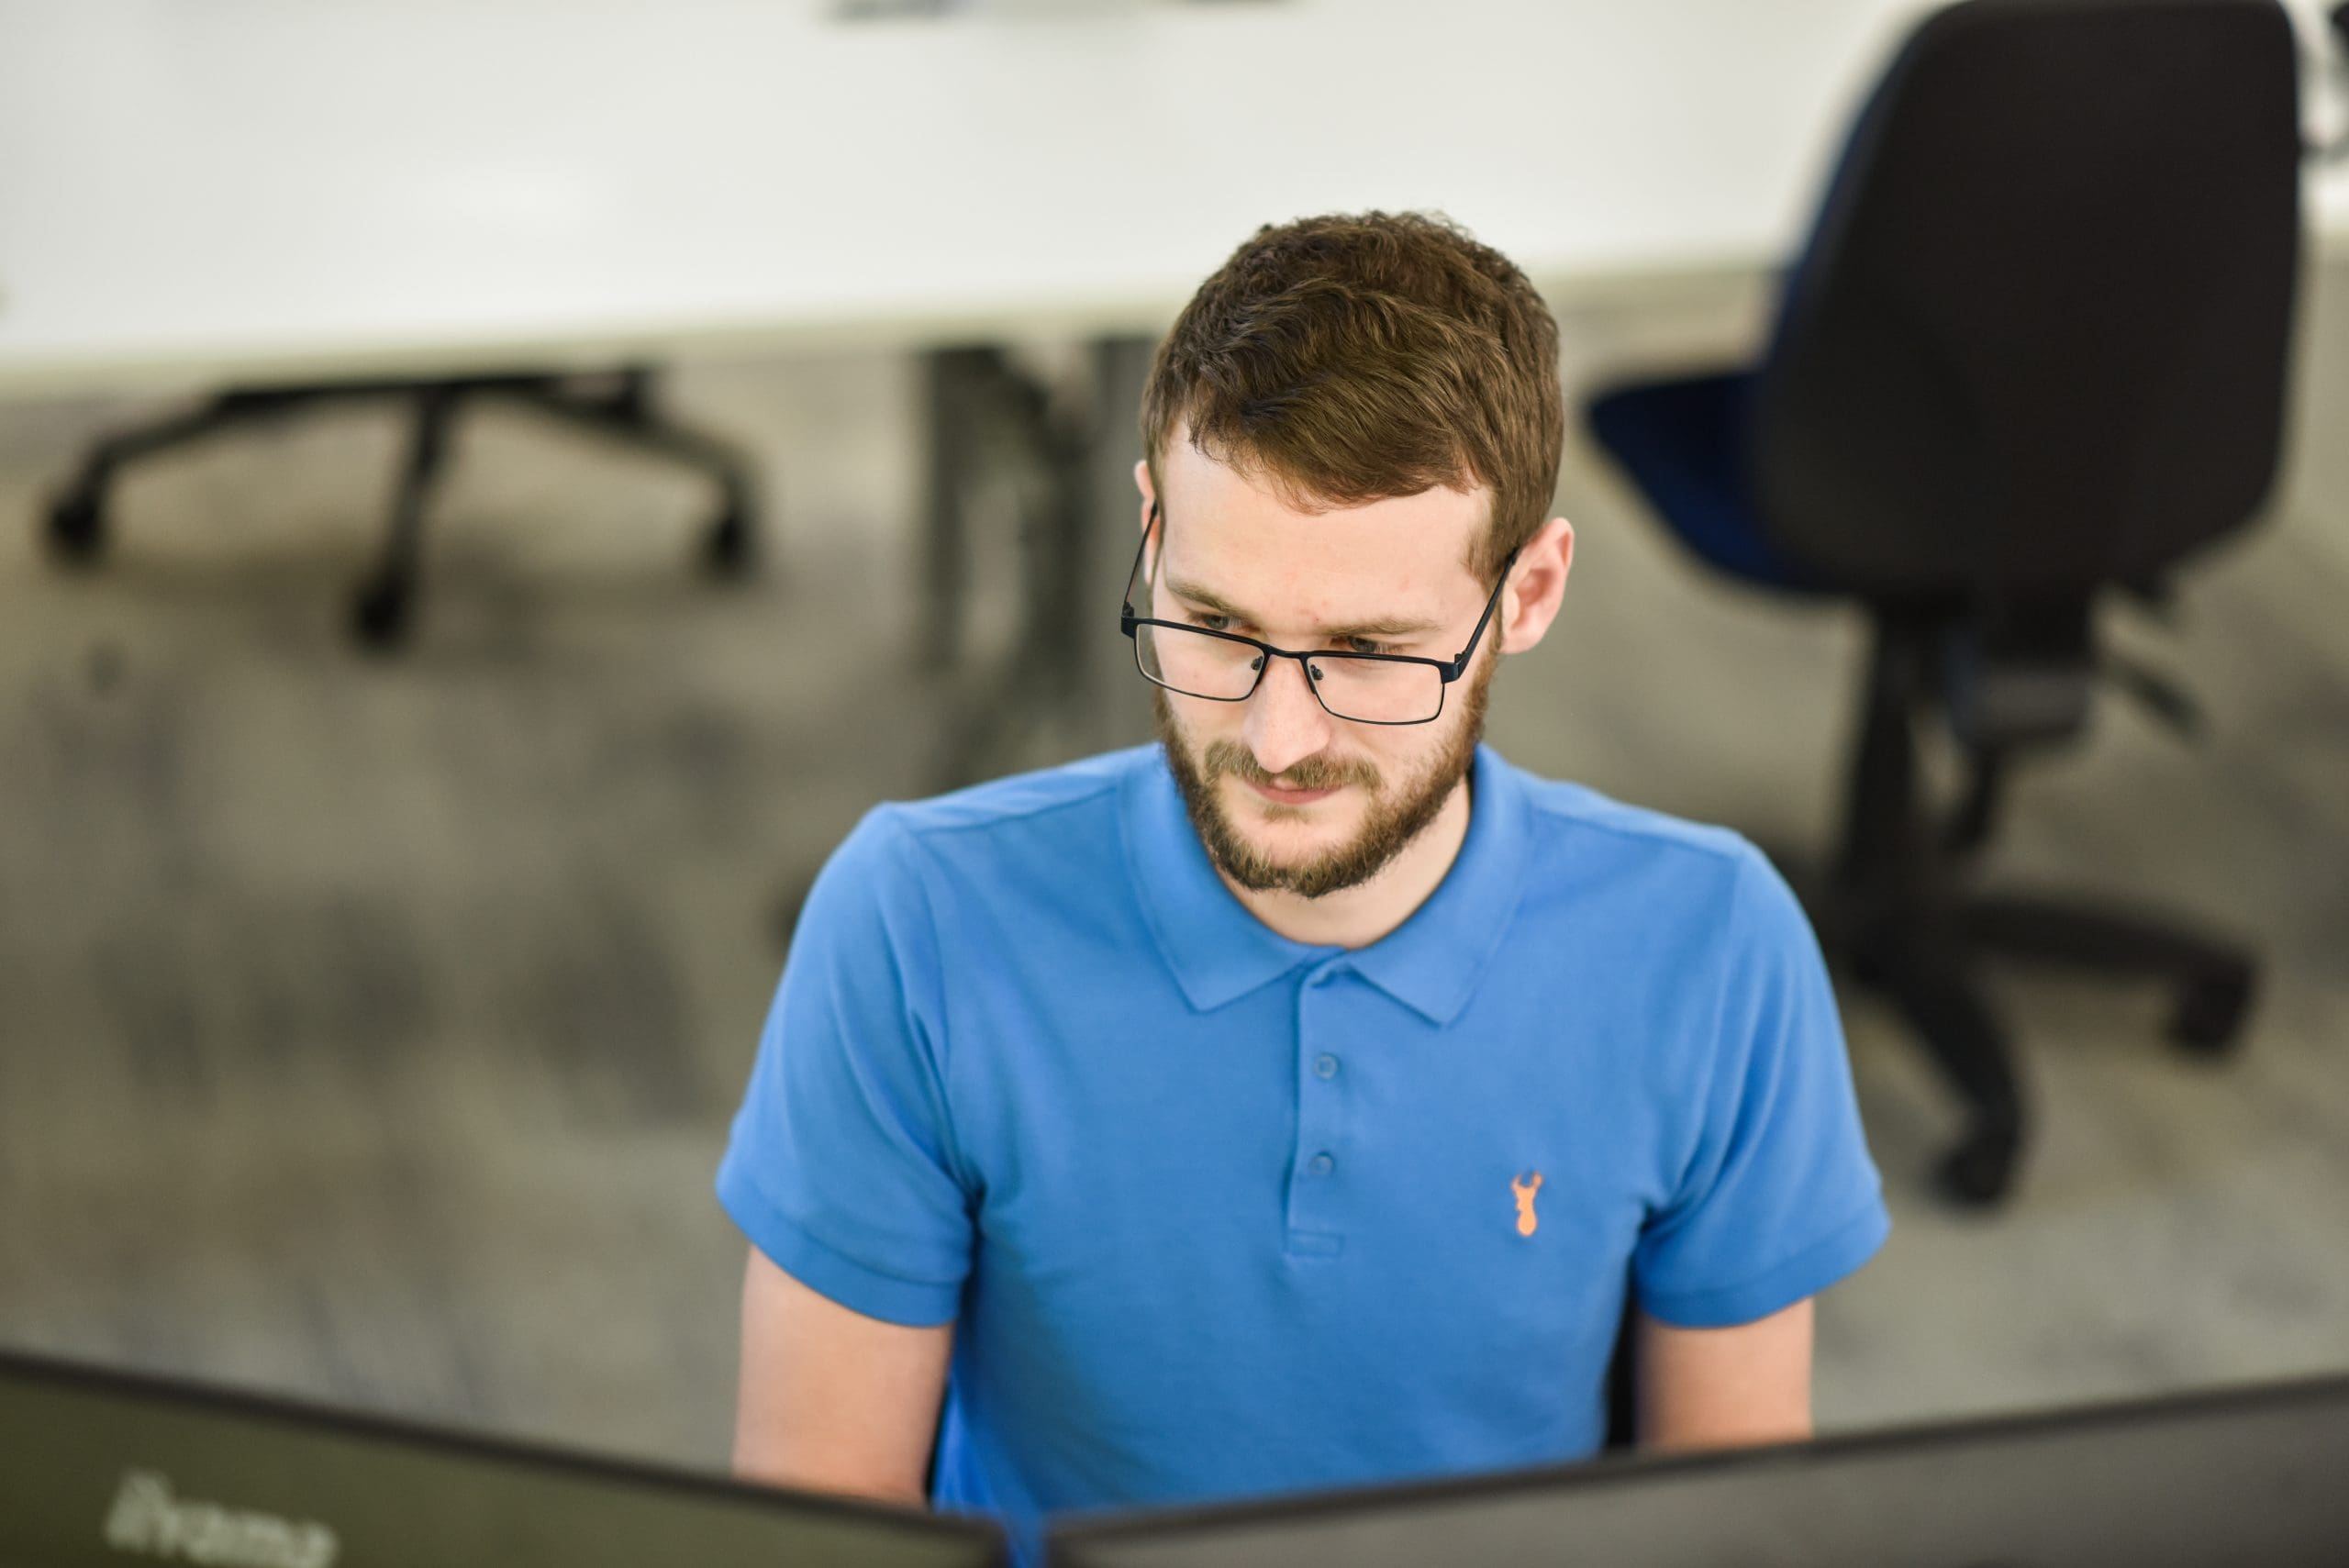 Photograph of a Cantium employee in a blue shirt and glasses, sat behind computer screens while working on analytics.